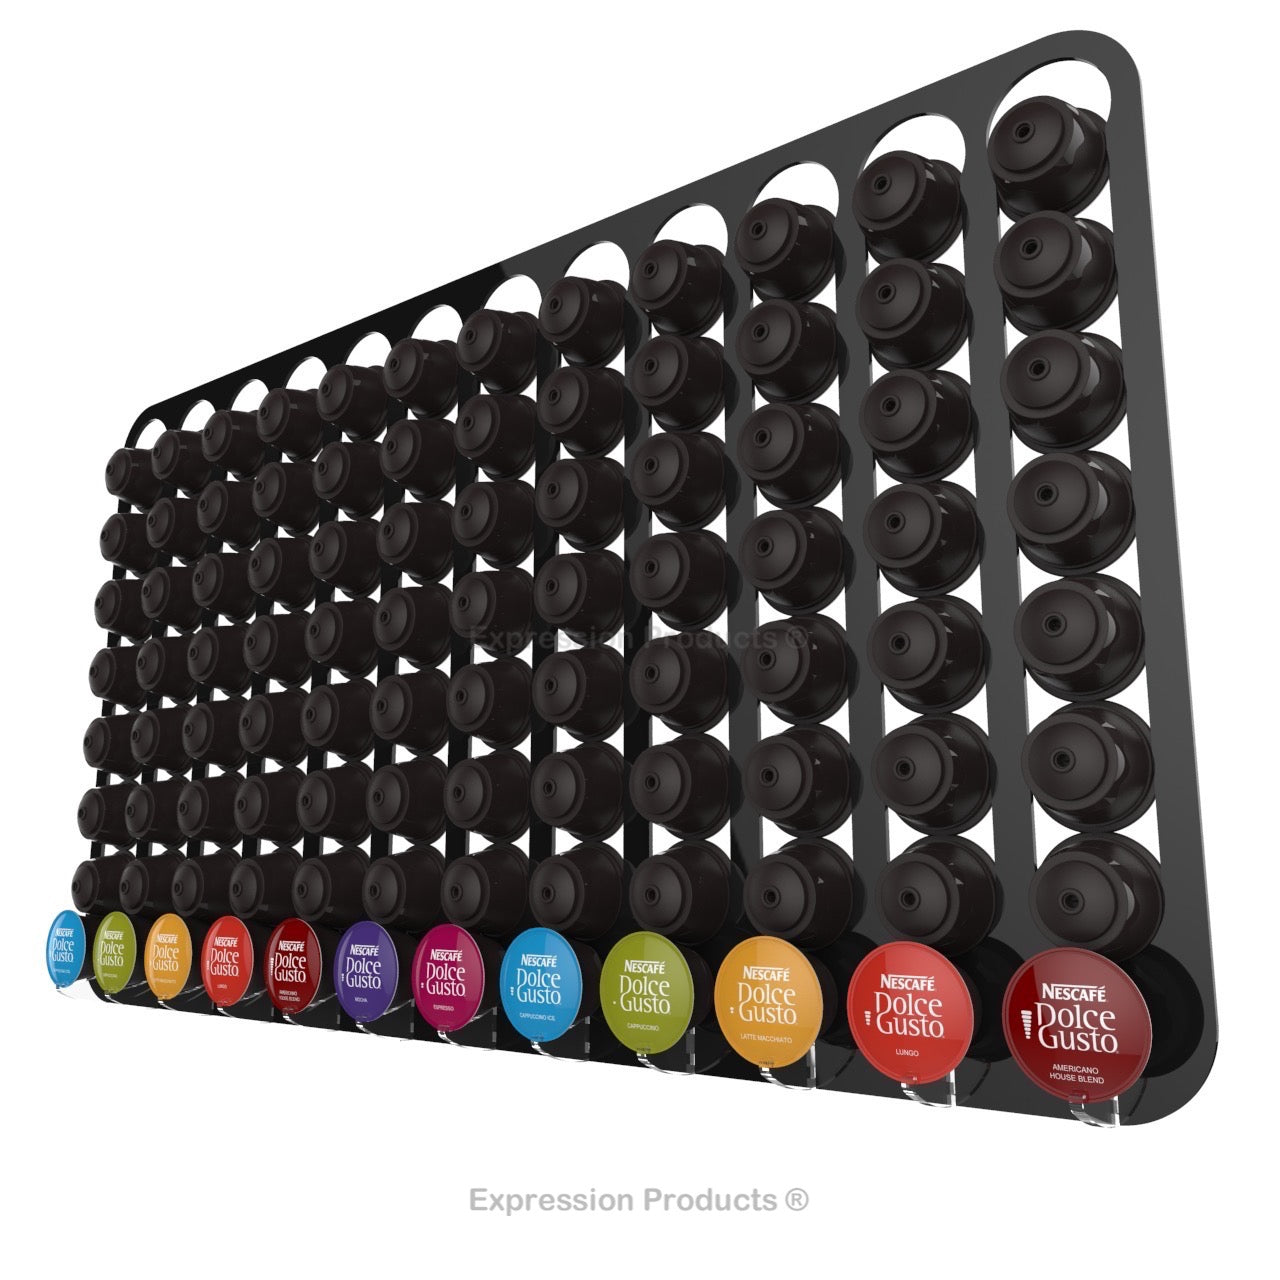 Dolce Gusto Coffee Pod Holder, Wall Mounted.  Shown in Black Holding 96 Pods